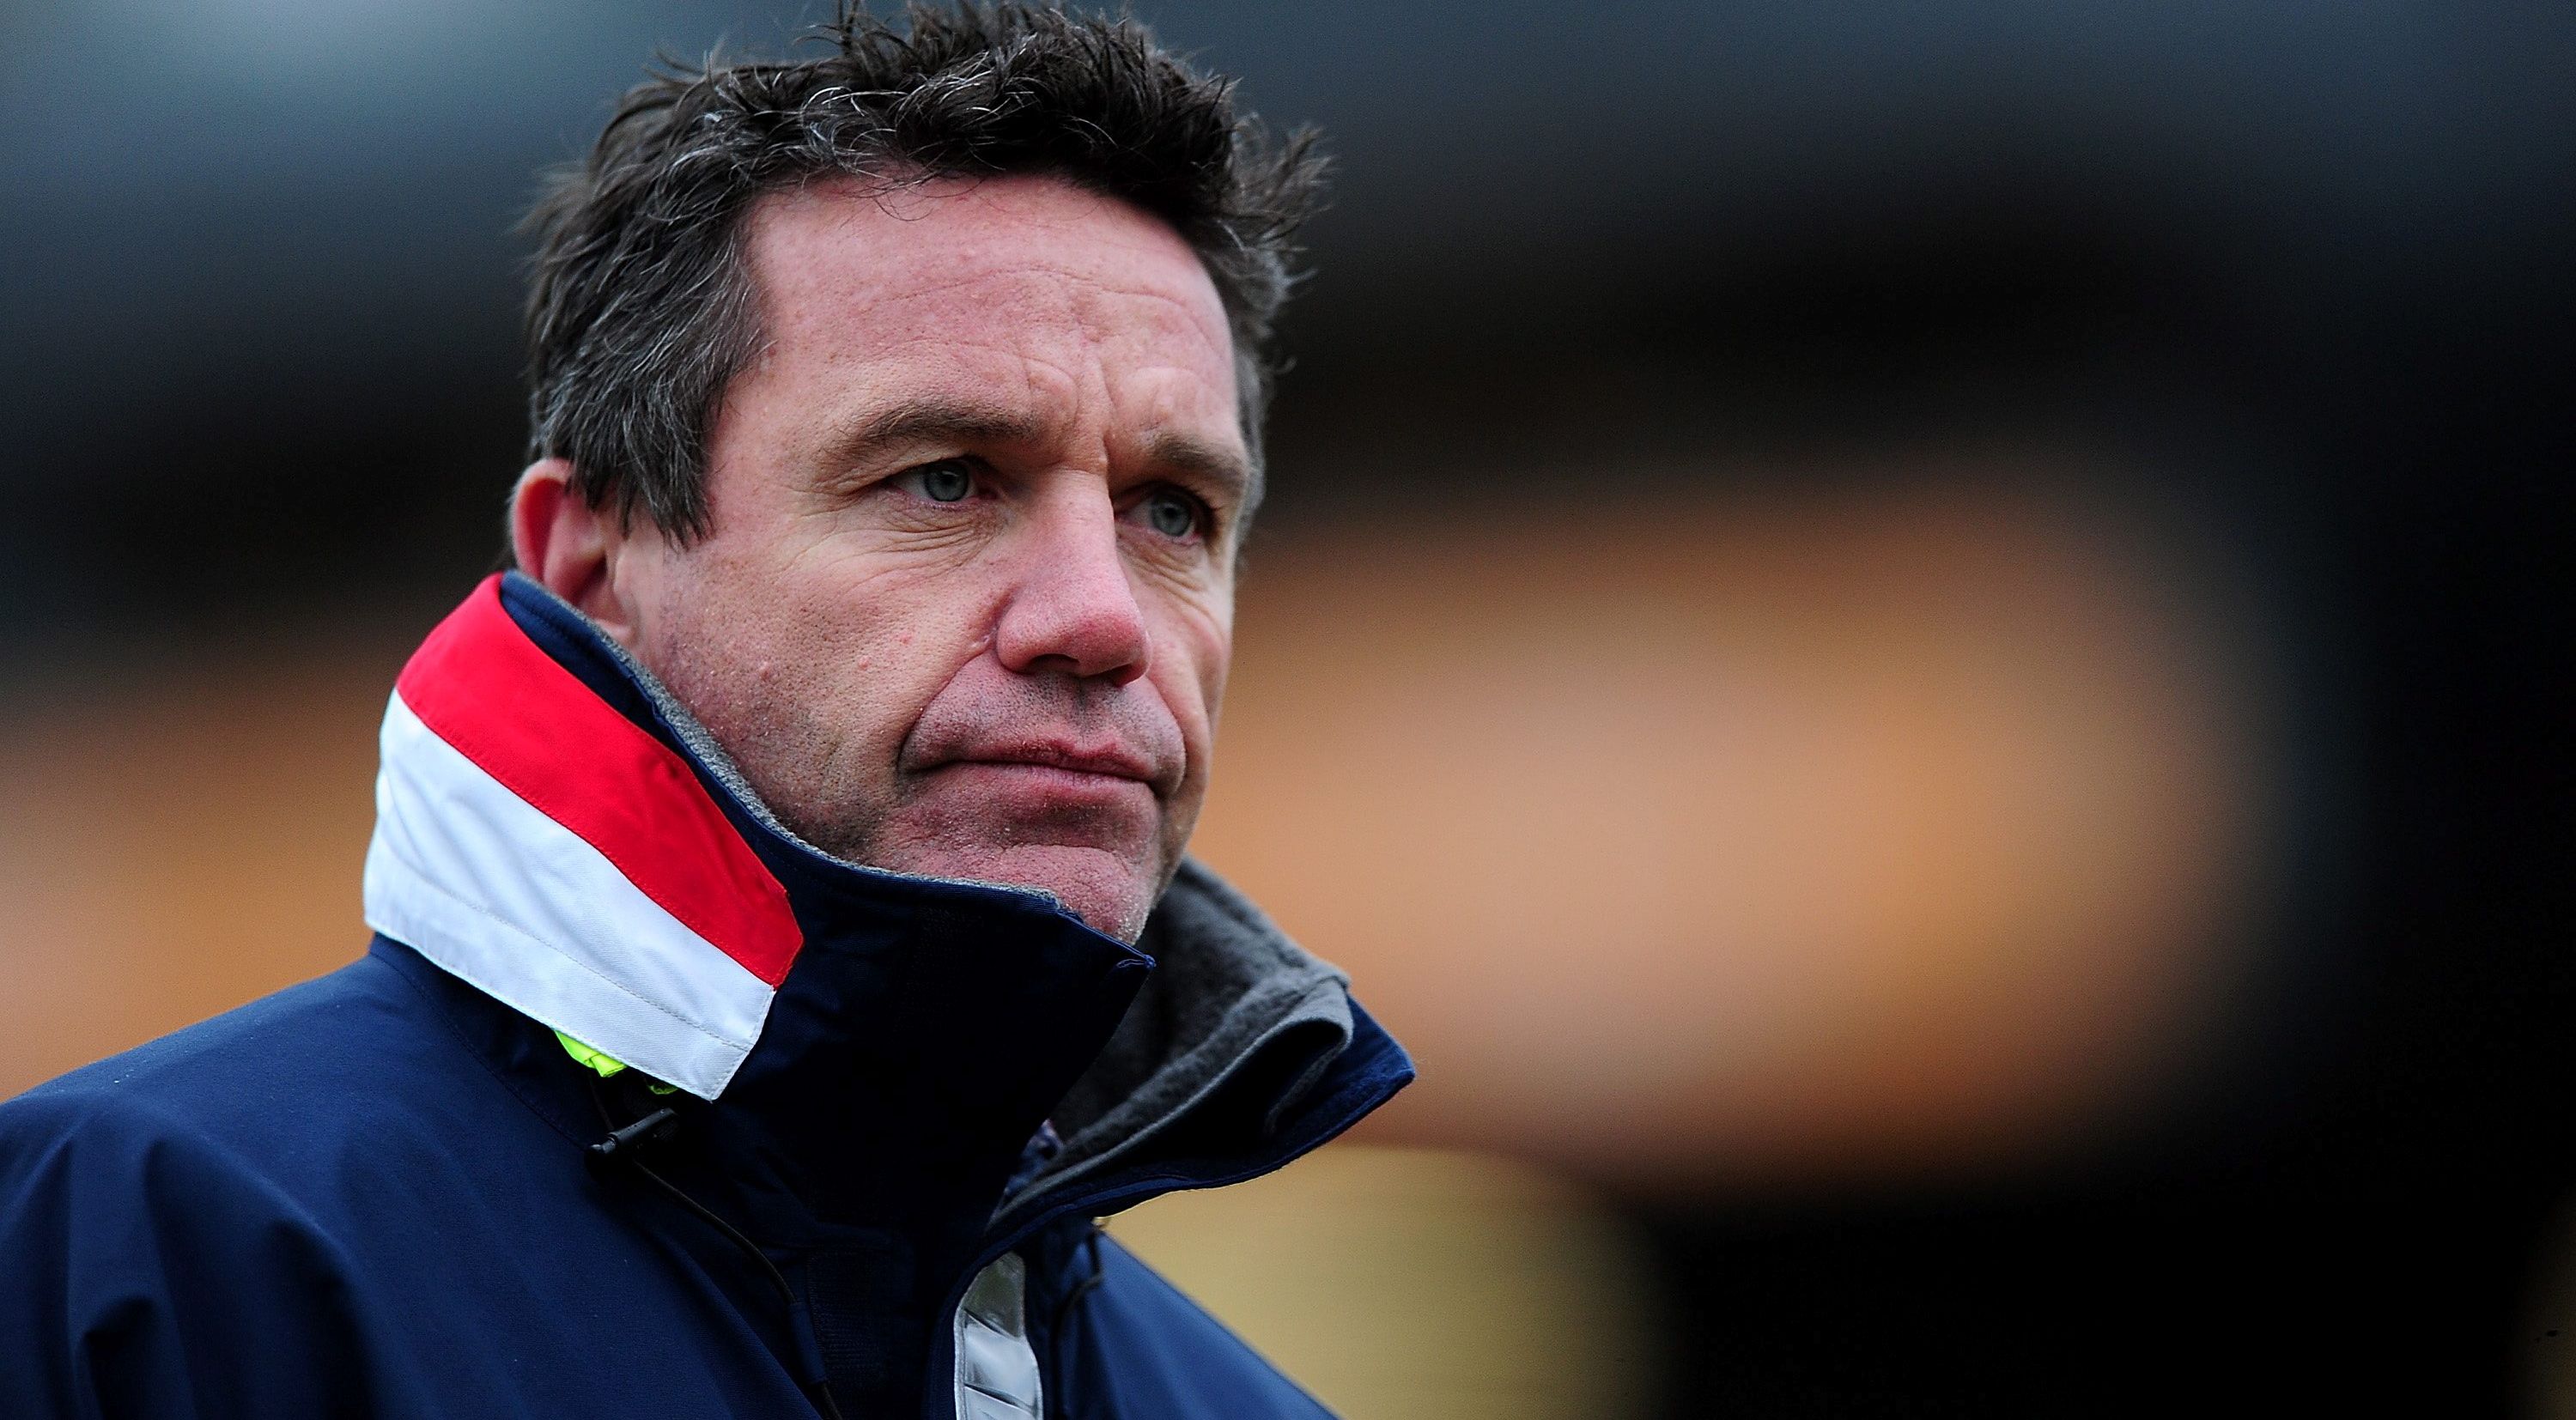 Bath head coach Mike Ford has backing of owner despite